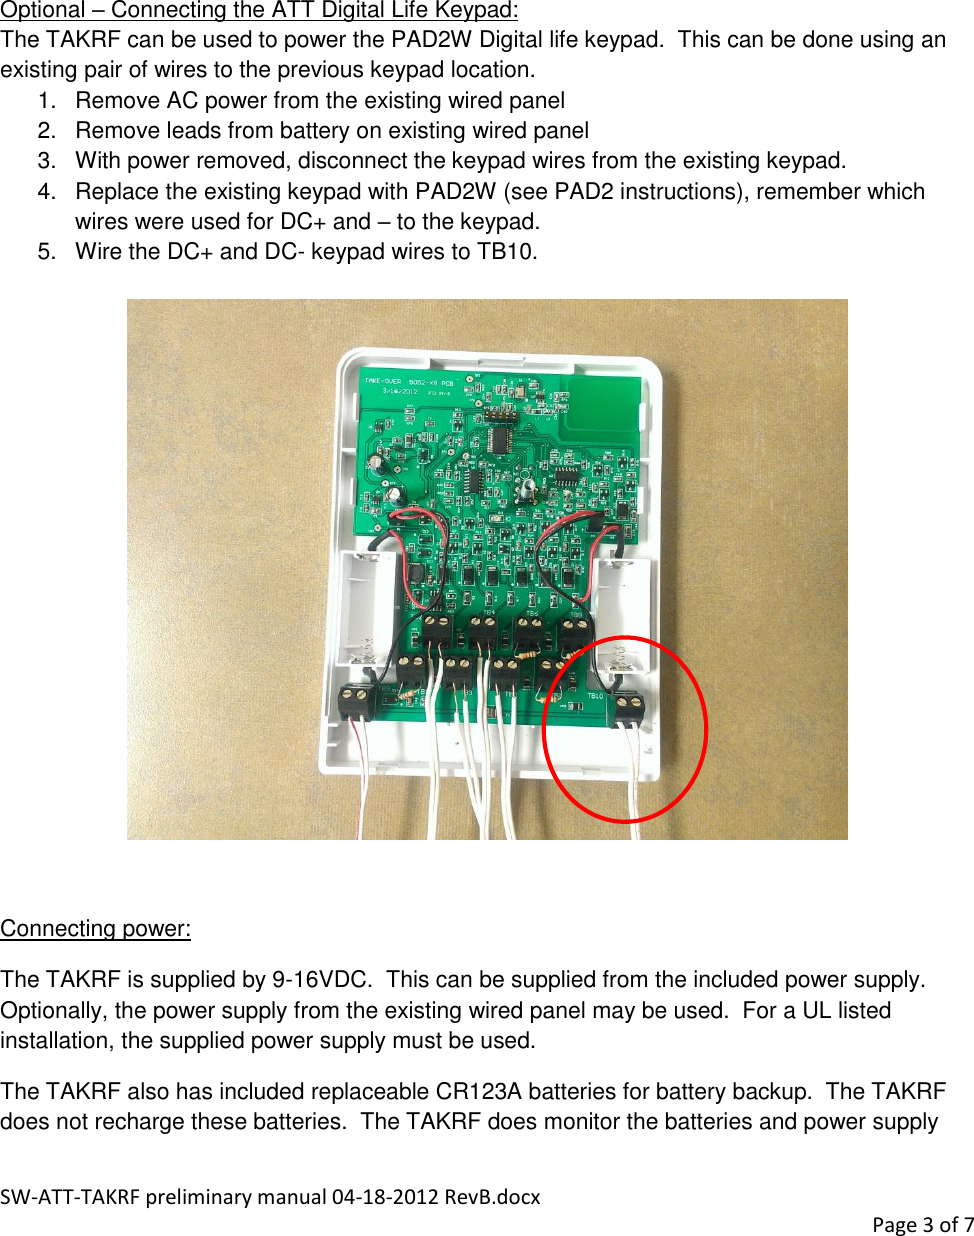 SW-ATT-TAKRF preliminary manual 04-18-2012 RevB.docx    Page 3 of 7       Optional – Connecting the ATT Digital Life Keypad: The TAKRF can be used to power the PAD2W Digital life keypad.  This can be done using an existing pair of wires to the previous keypad location. 1.  Remove AC power from the existing wired panel 2.  Remove leads from battery on existing wired panel 3.  With power removed, disconnect the keypad wires from the existing keypad. 4.  Replace the existing keypad with PAD2W (see PAD2 instructions), remember which wires were used for DC+ and – to the keypad. 5.  Wire the DC+ and DC- keypad wires to TB10.    Connecting power: The TAKRF is supplied by 9-16VDC.  This can be supplied from the included power supply.  Optionally, the power supply from the existing wired panel may be used.  For a UL listed installation, the supplied power supply must be used. The TAKRF also has included replaceable CR123A batteries for battery backup.  The TAKRF does not recharge these batteries.  The TAKRF does monitor the batteries and power supply 